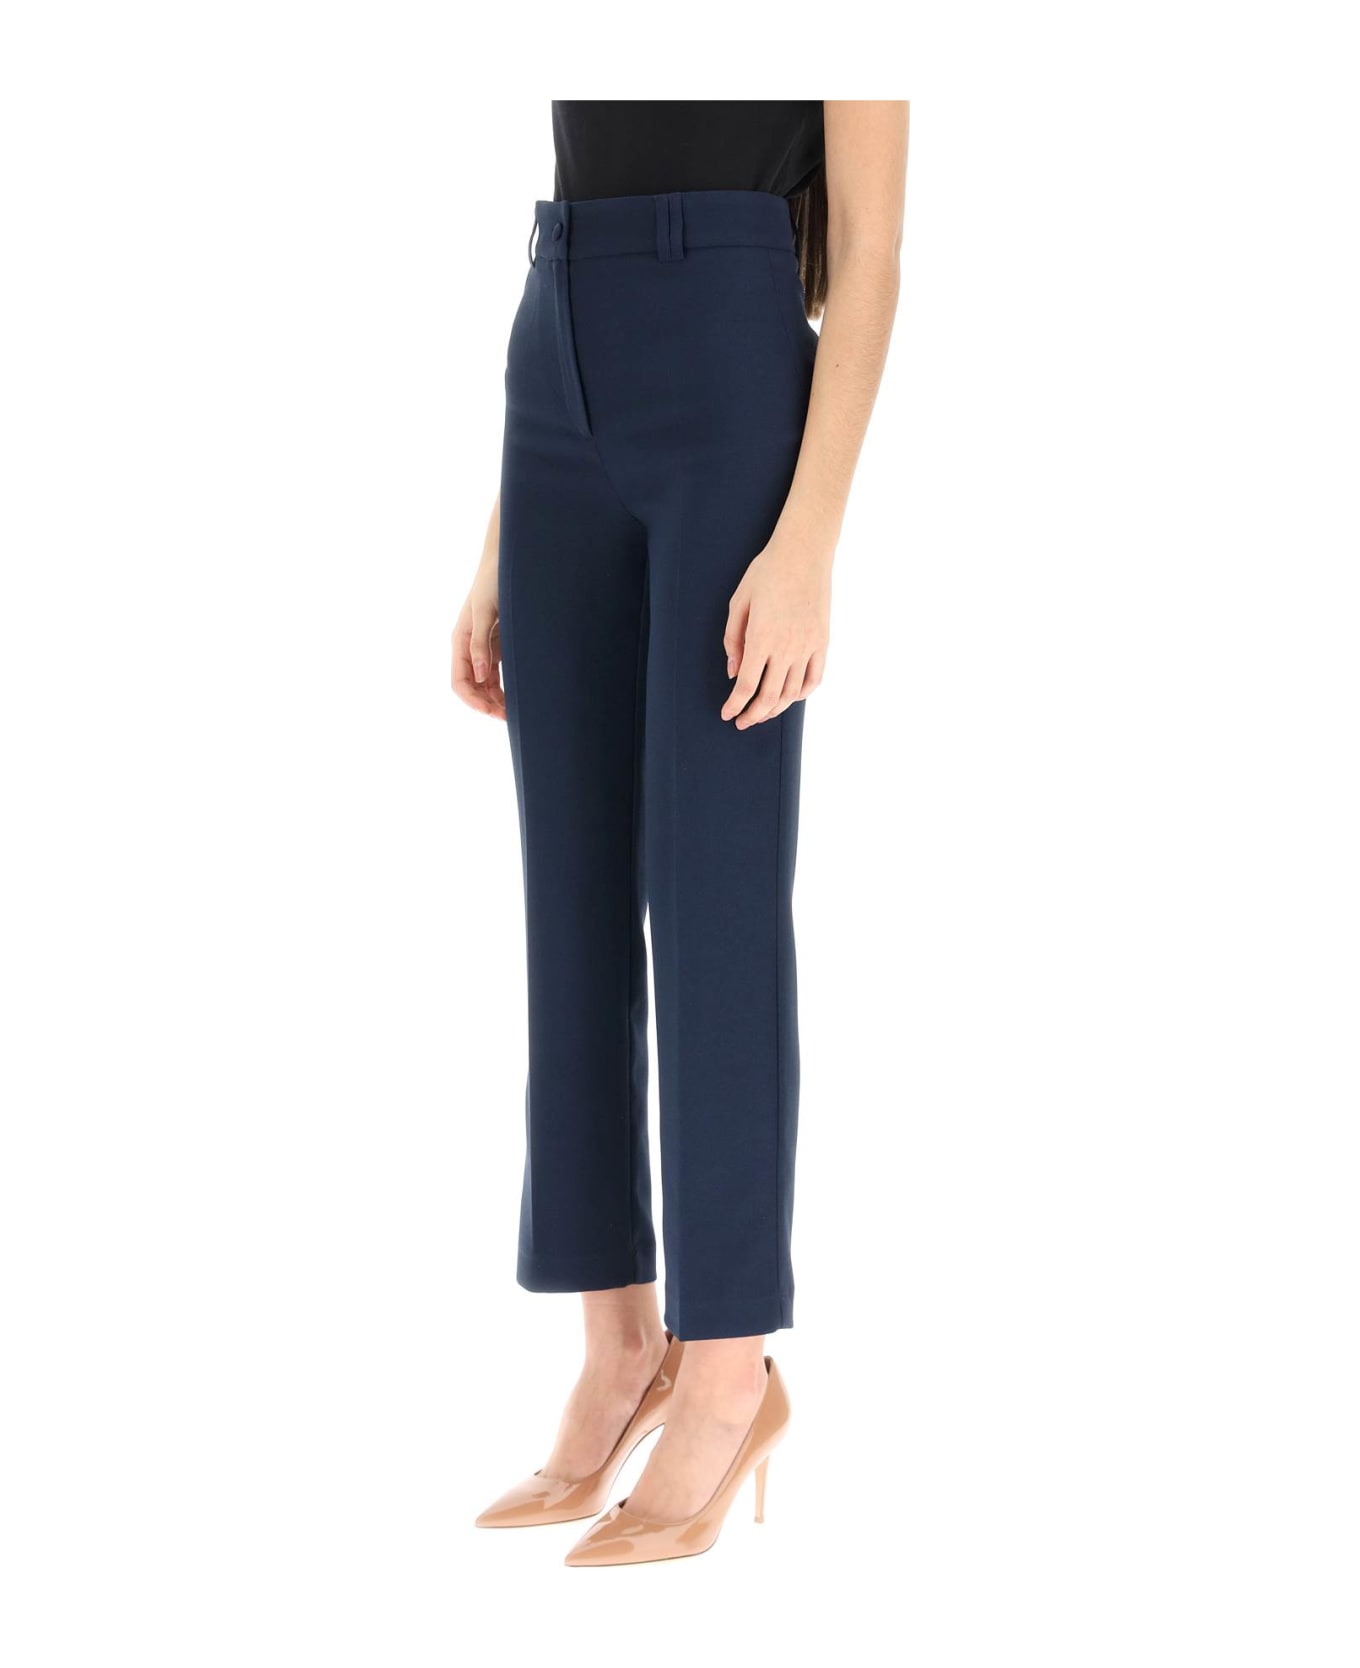 Hebe Studio 'loulou' Cady Trousers - NAVY (Blue)